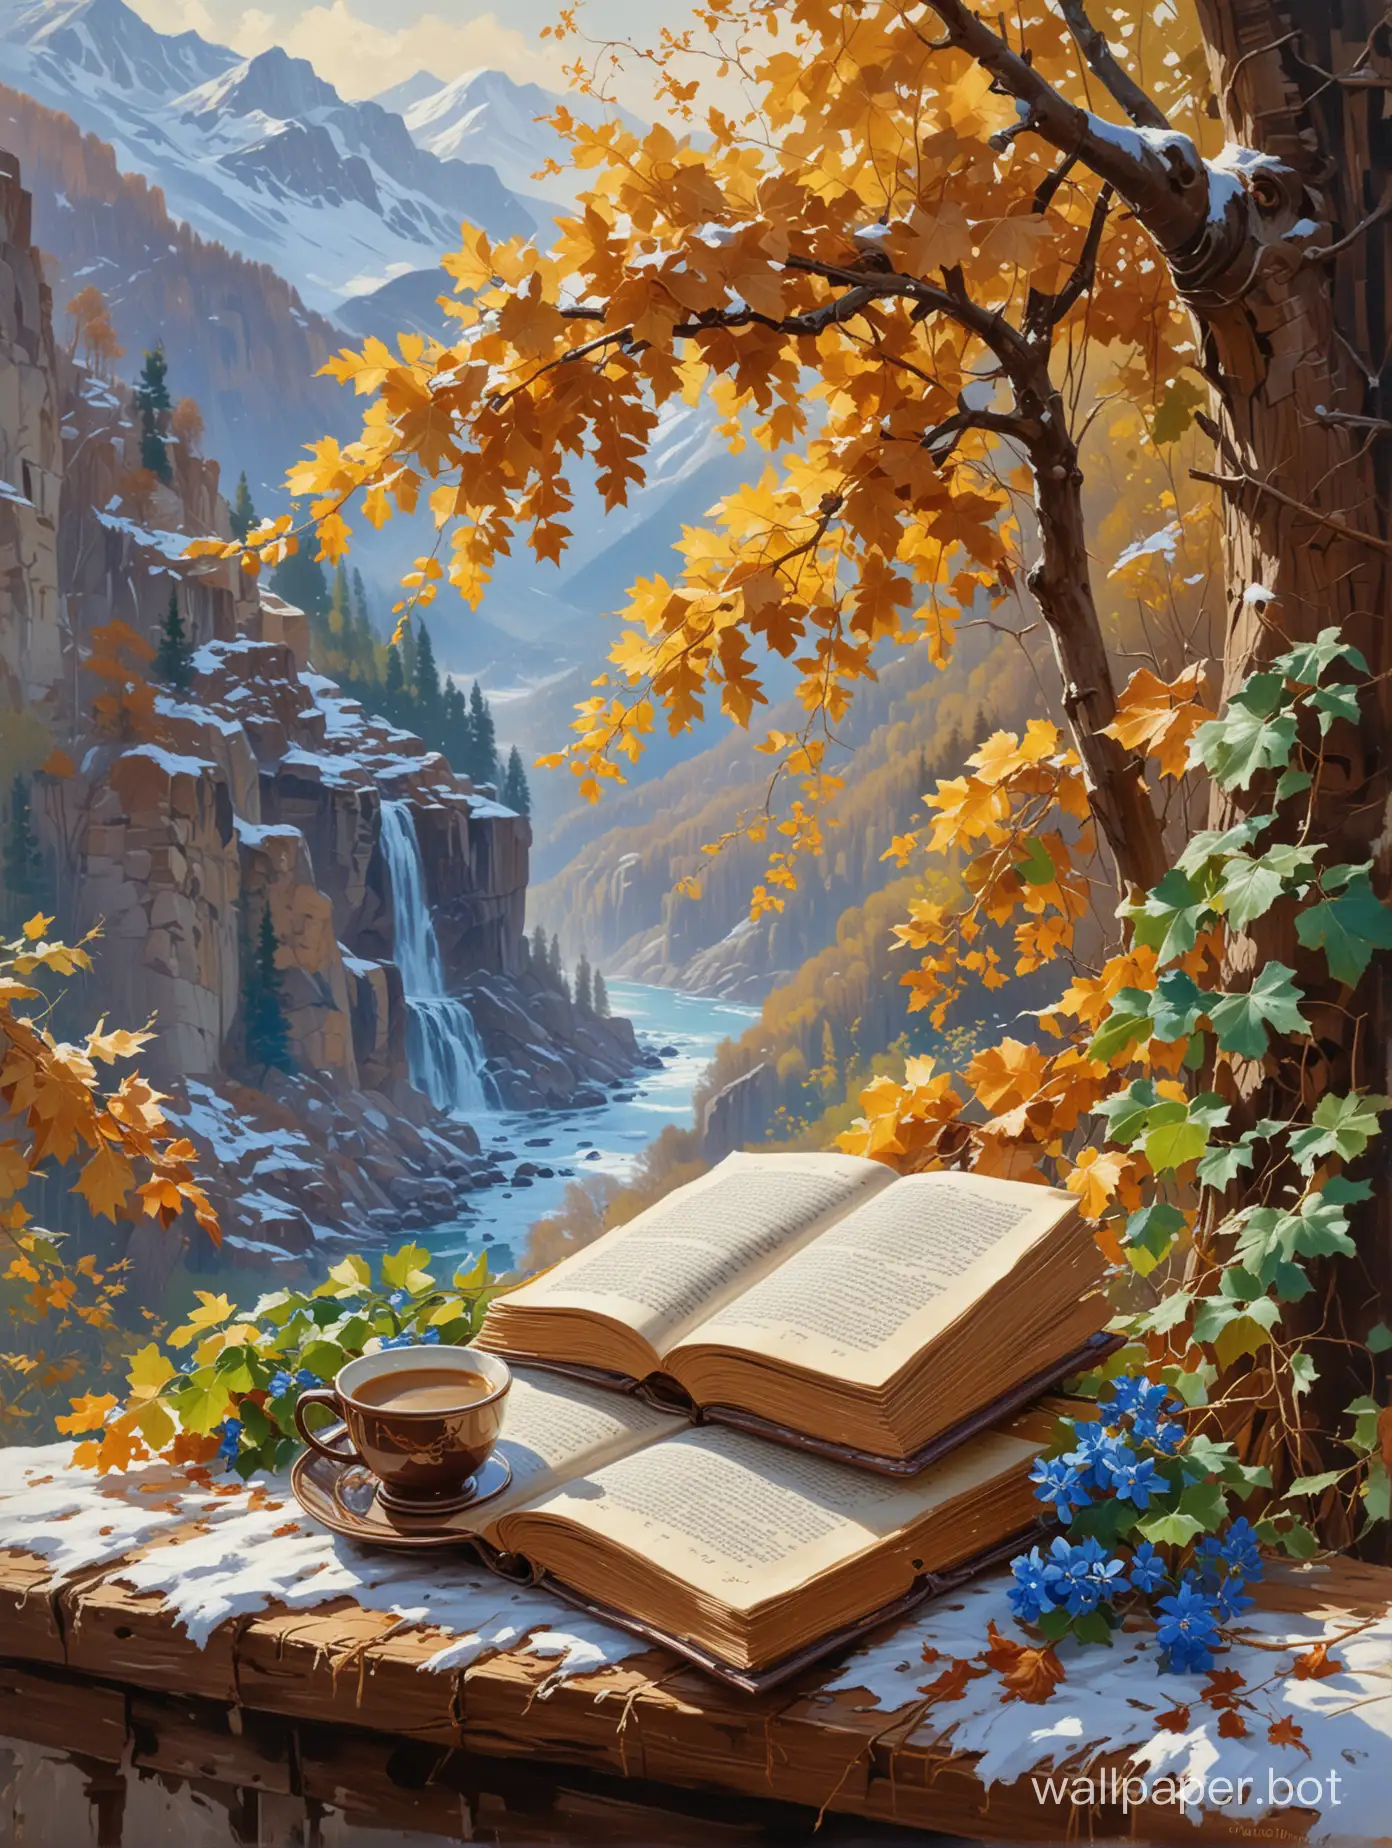 Vladimir gusev Oil painting of a closed book on a shelf covered by brown grape's leaves tree and leaves on the book next to it a brown cup of coffee, outside view of a winter mountain and waterfall with blue flowers,